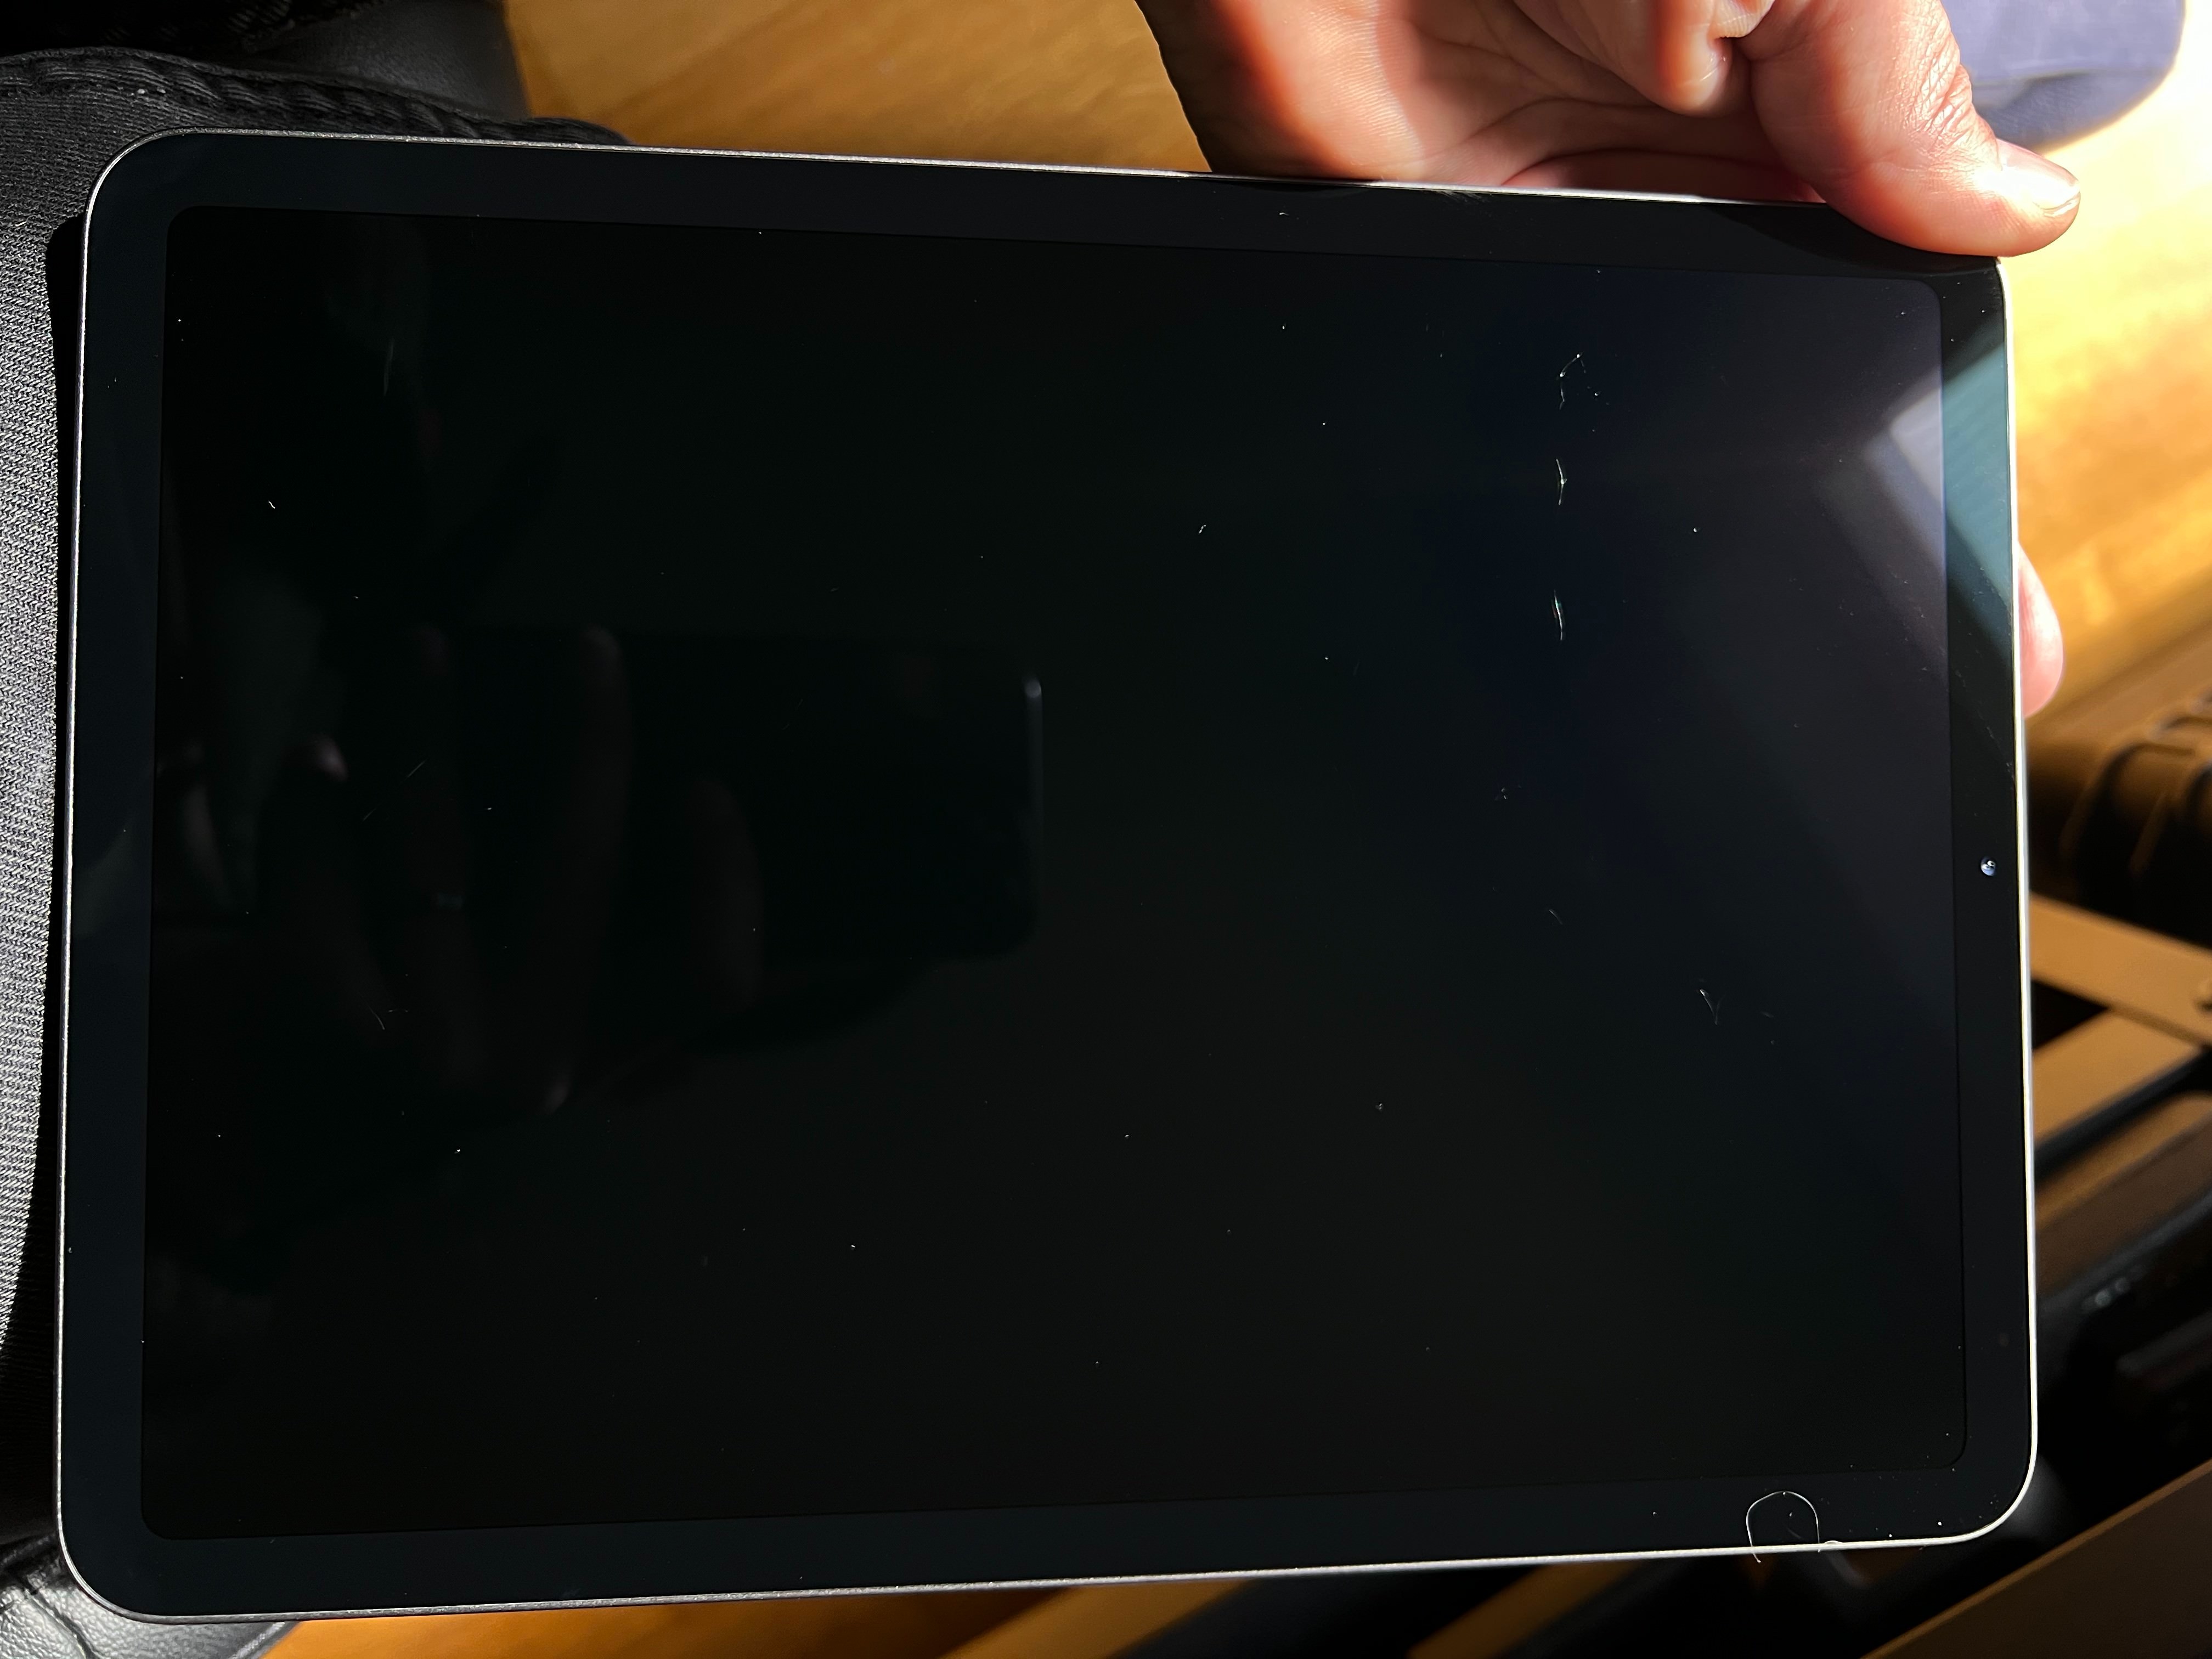 Why do iPads scratch so easily?